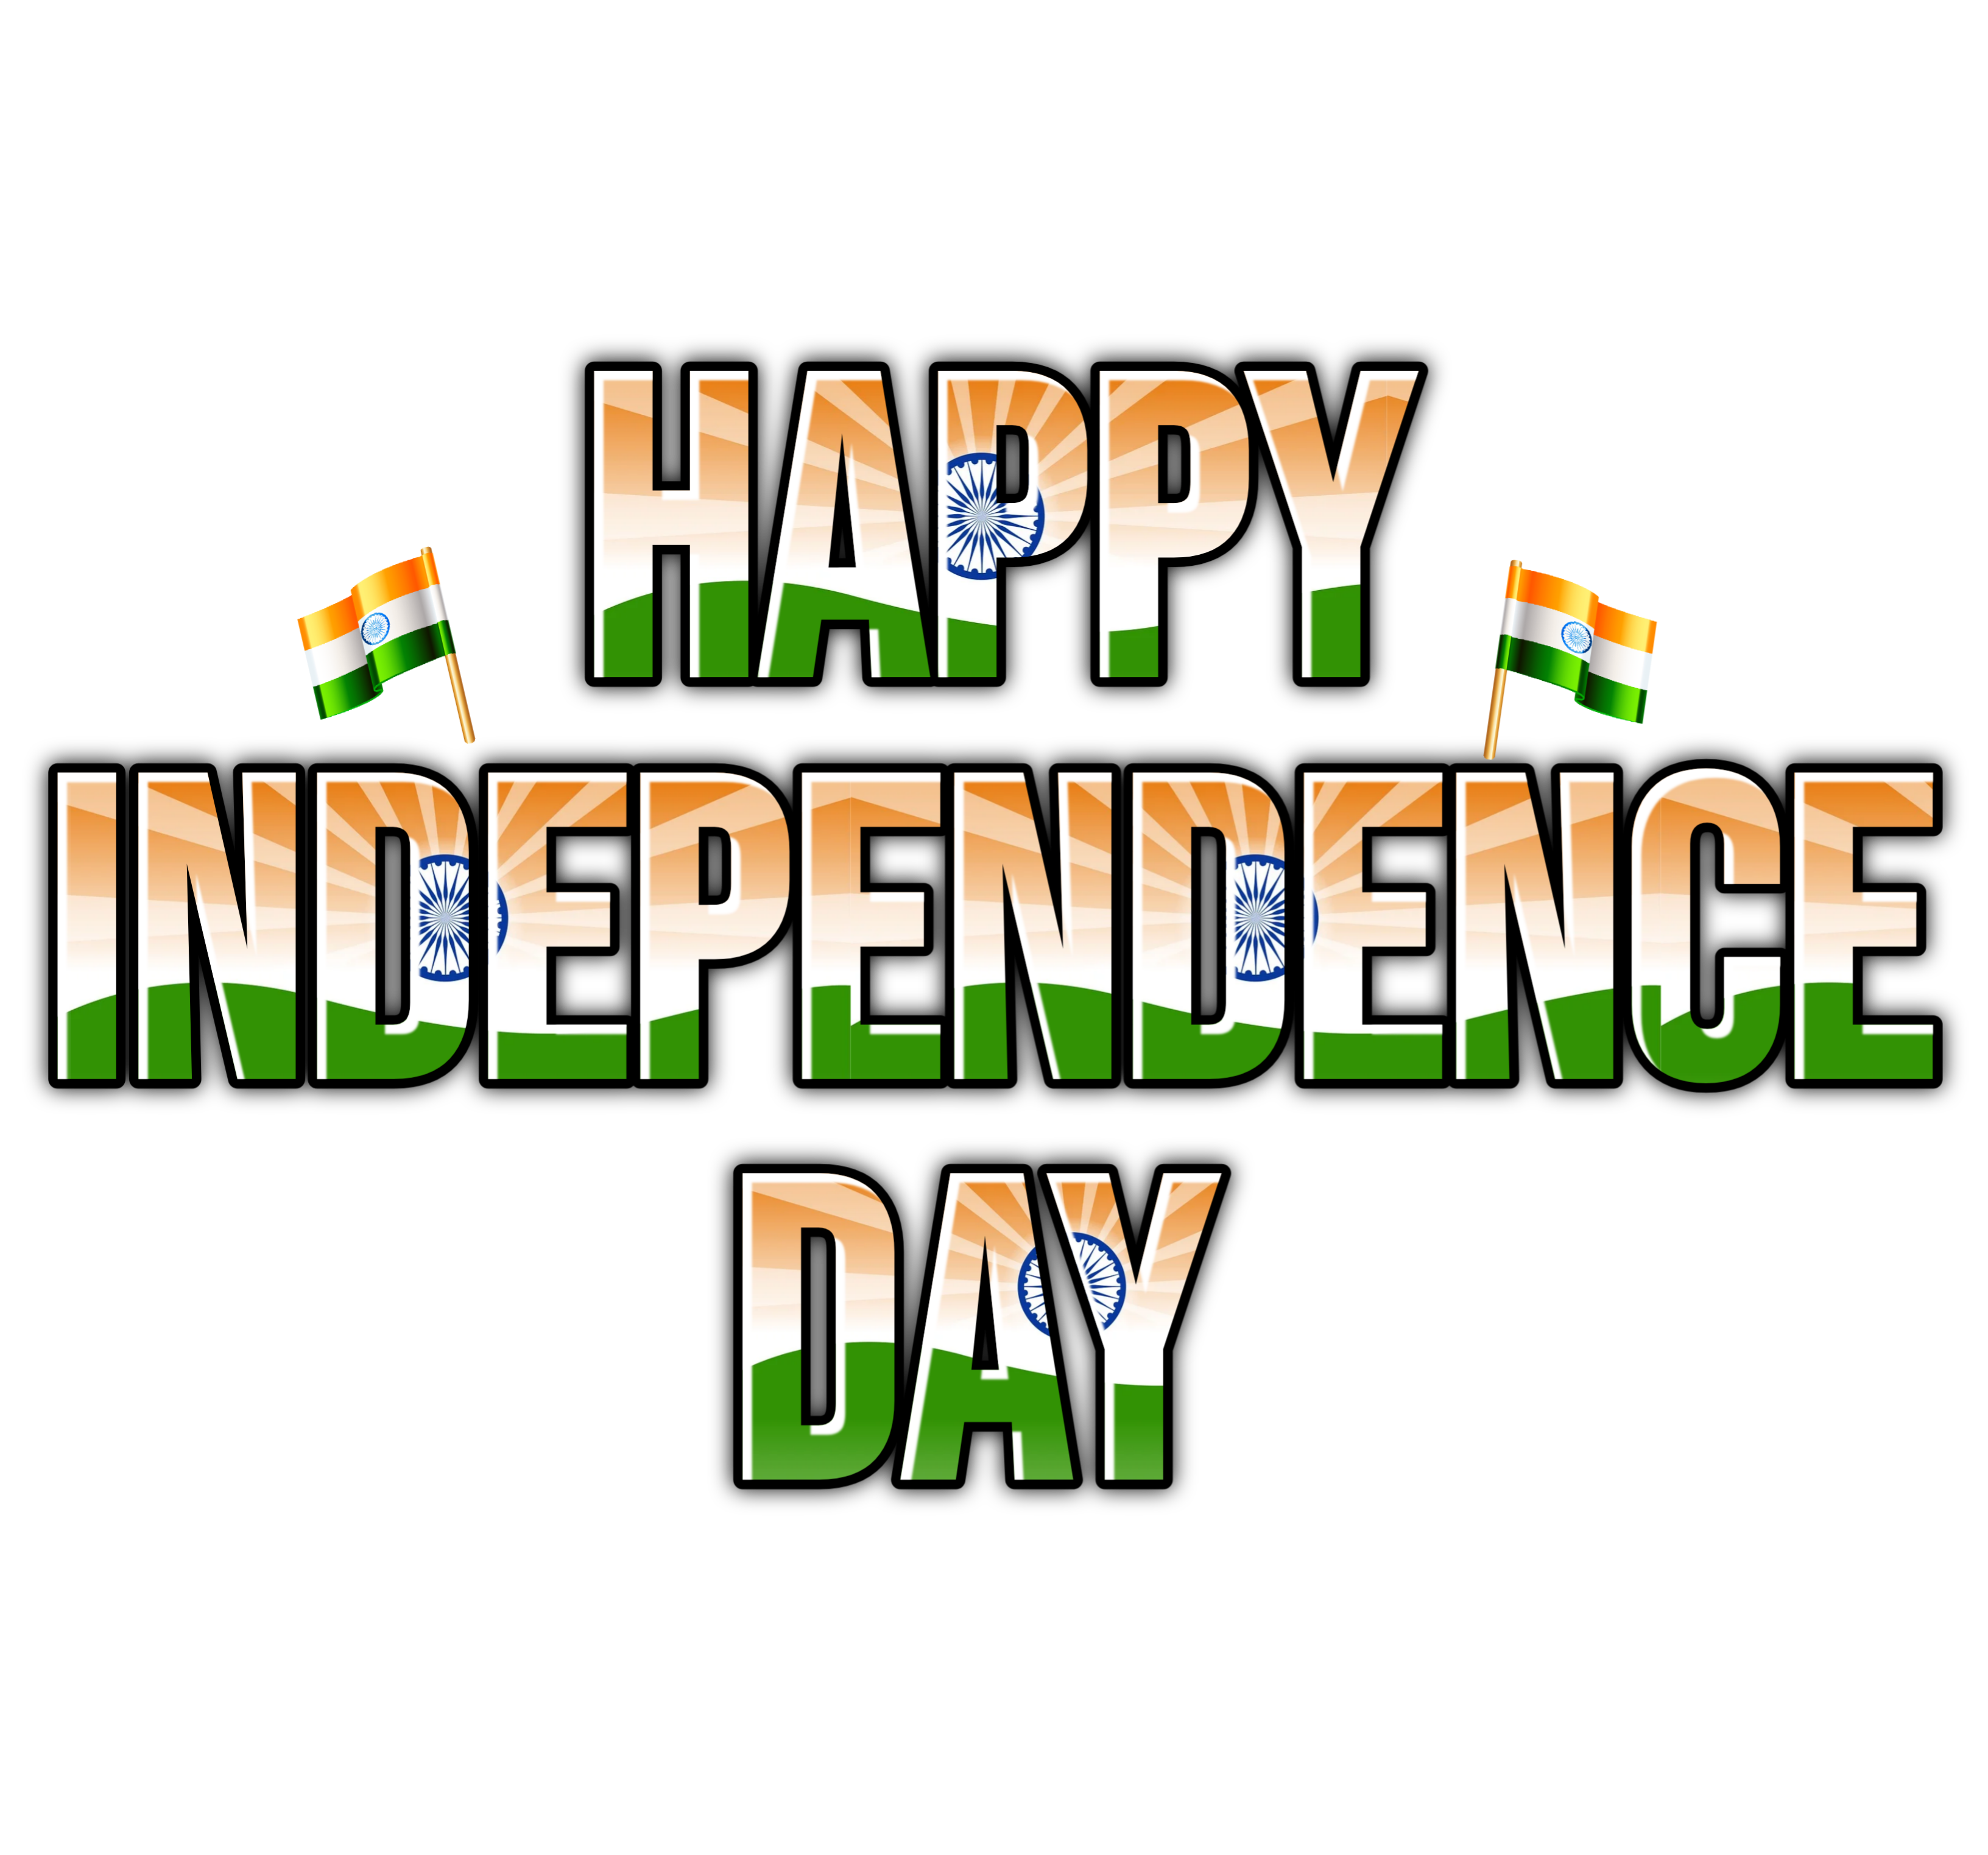 Independence Day wish